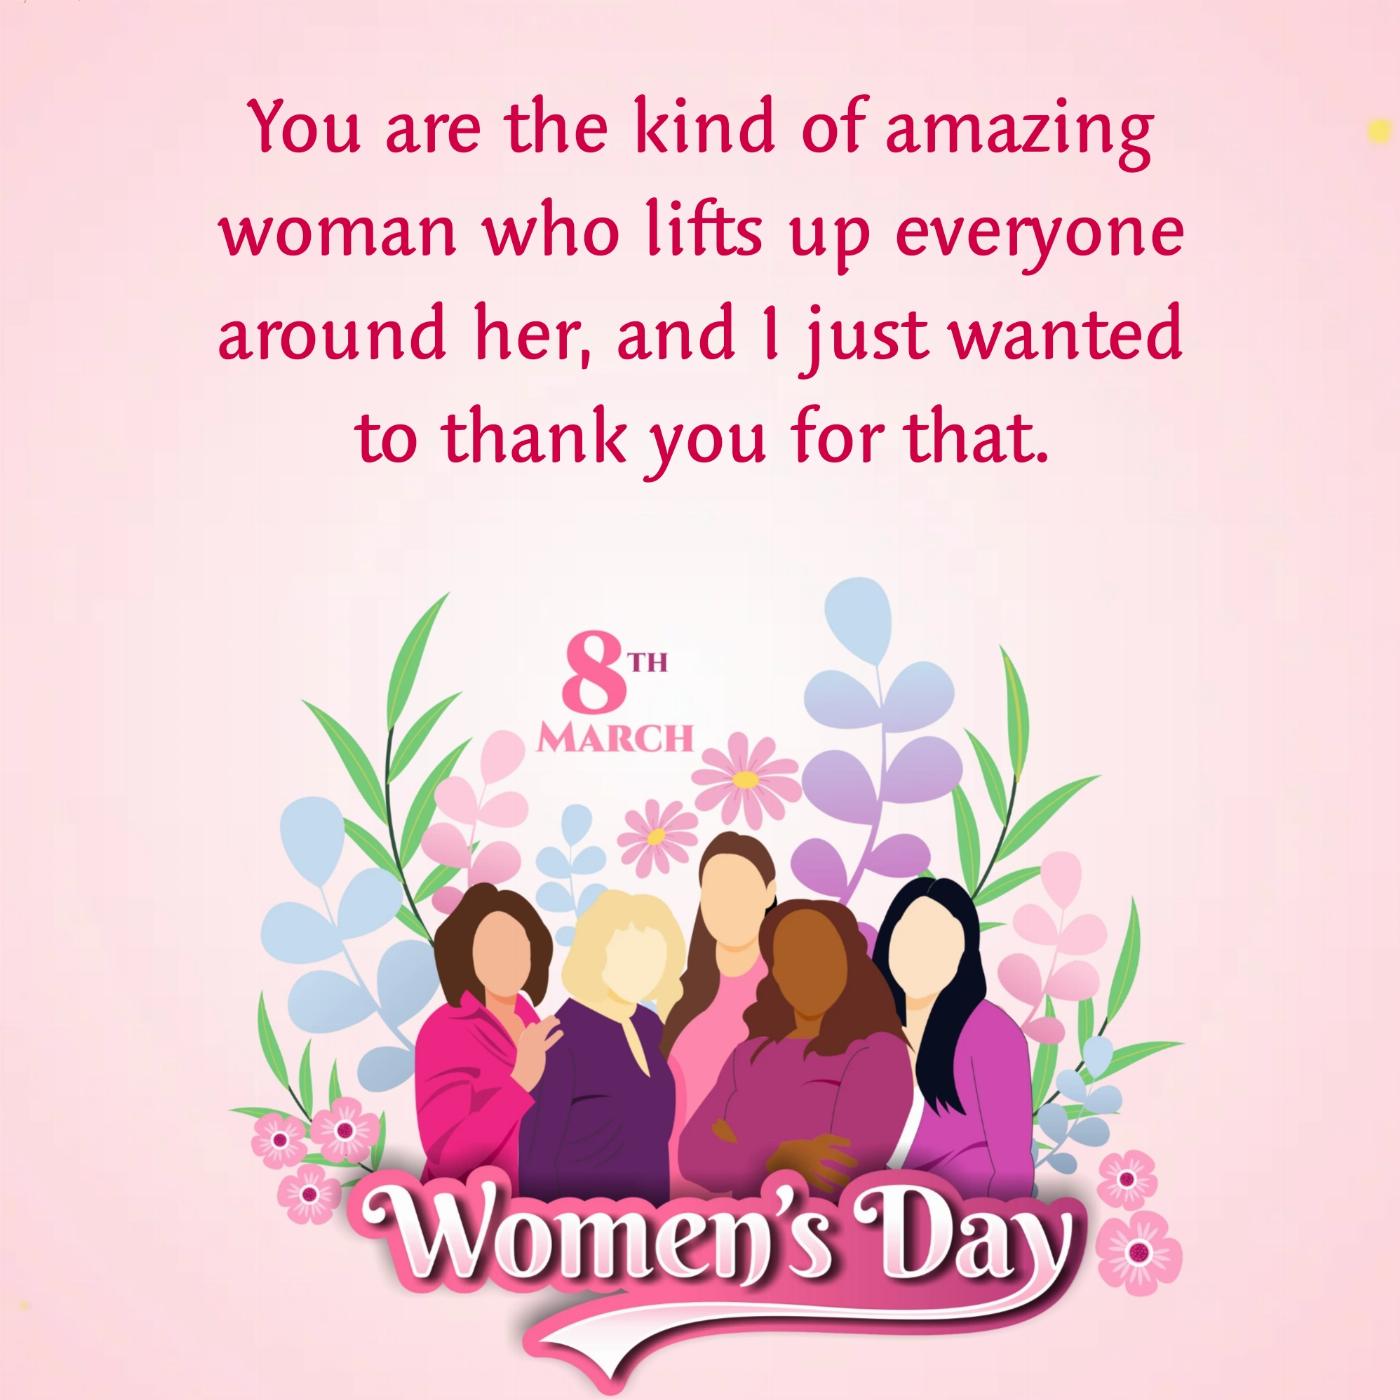 You are the kind of amazing woman who lifts up everyone